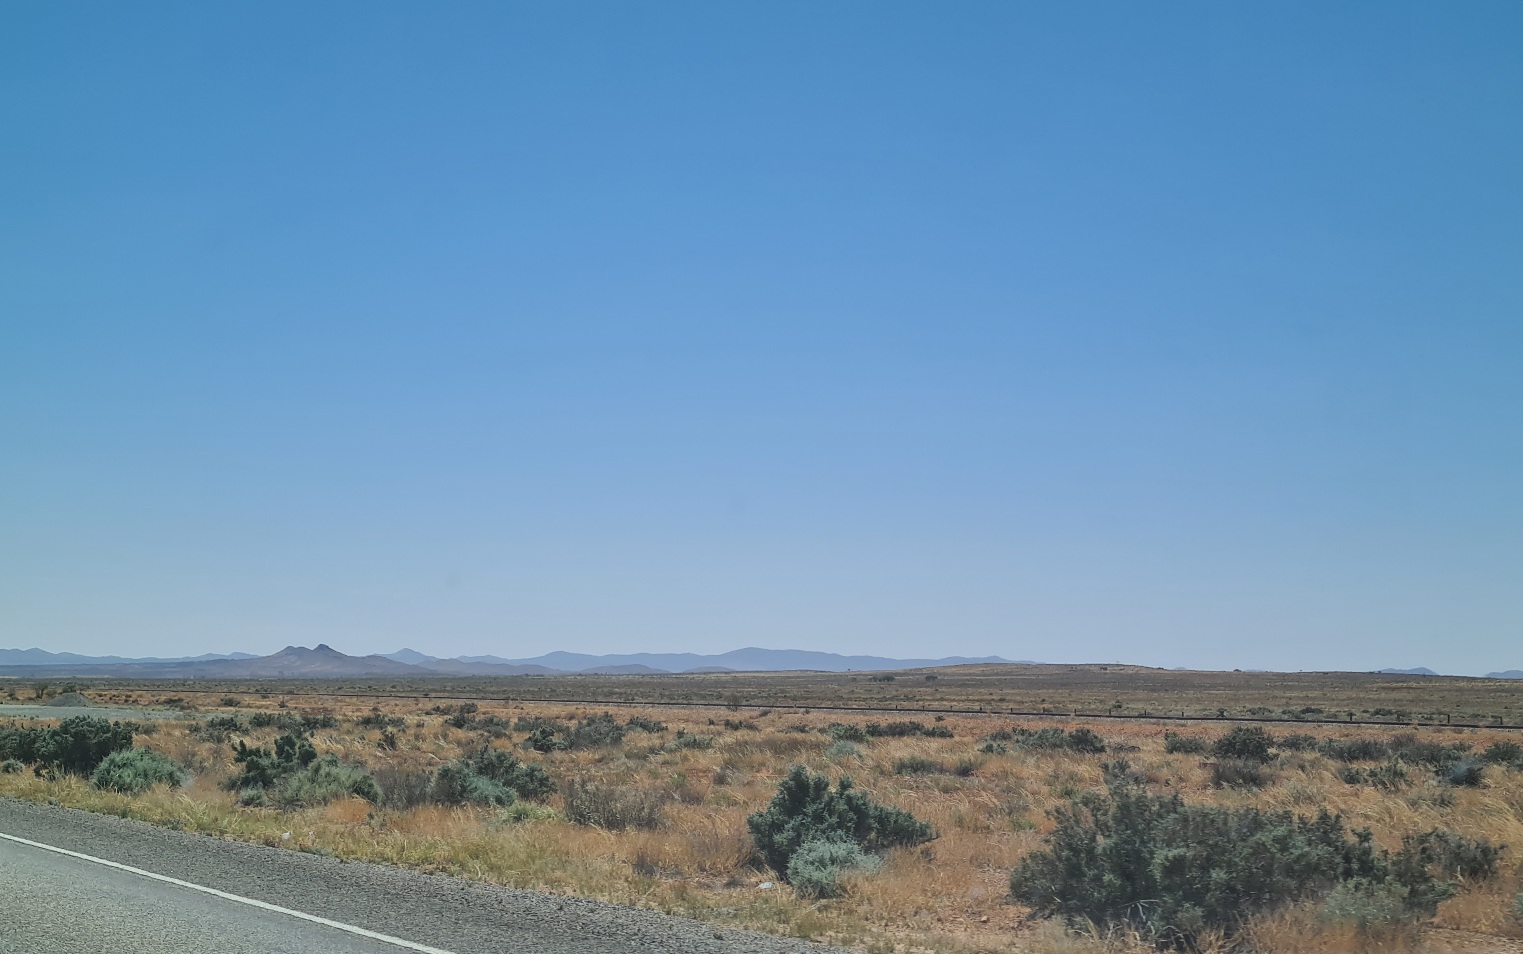 Southern end of the Flinders Ranges